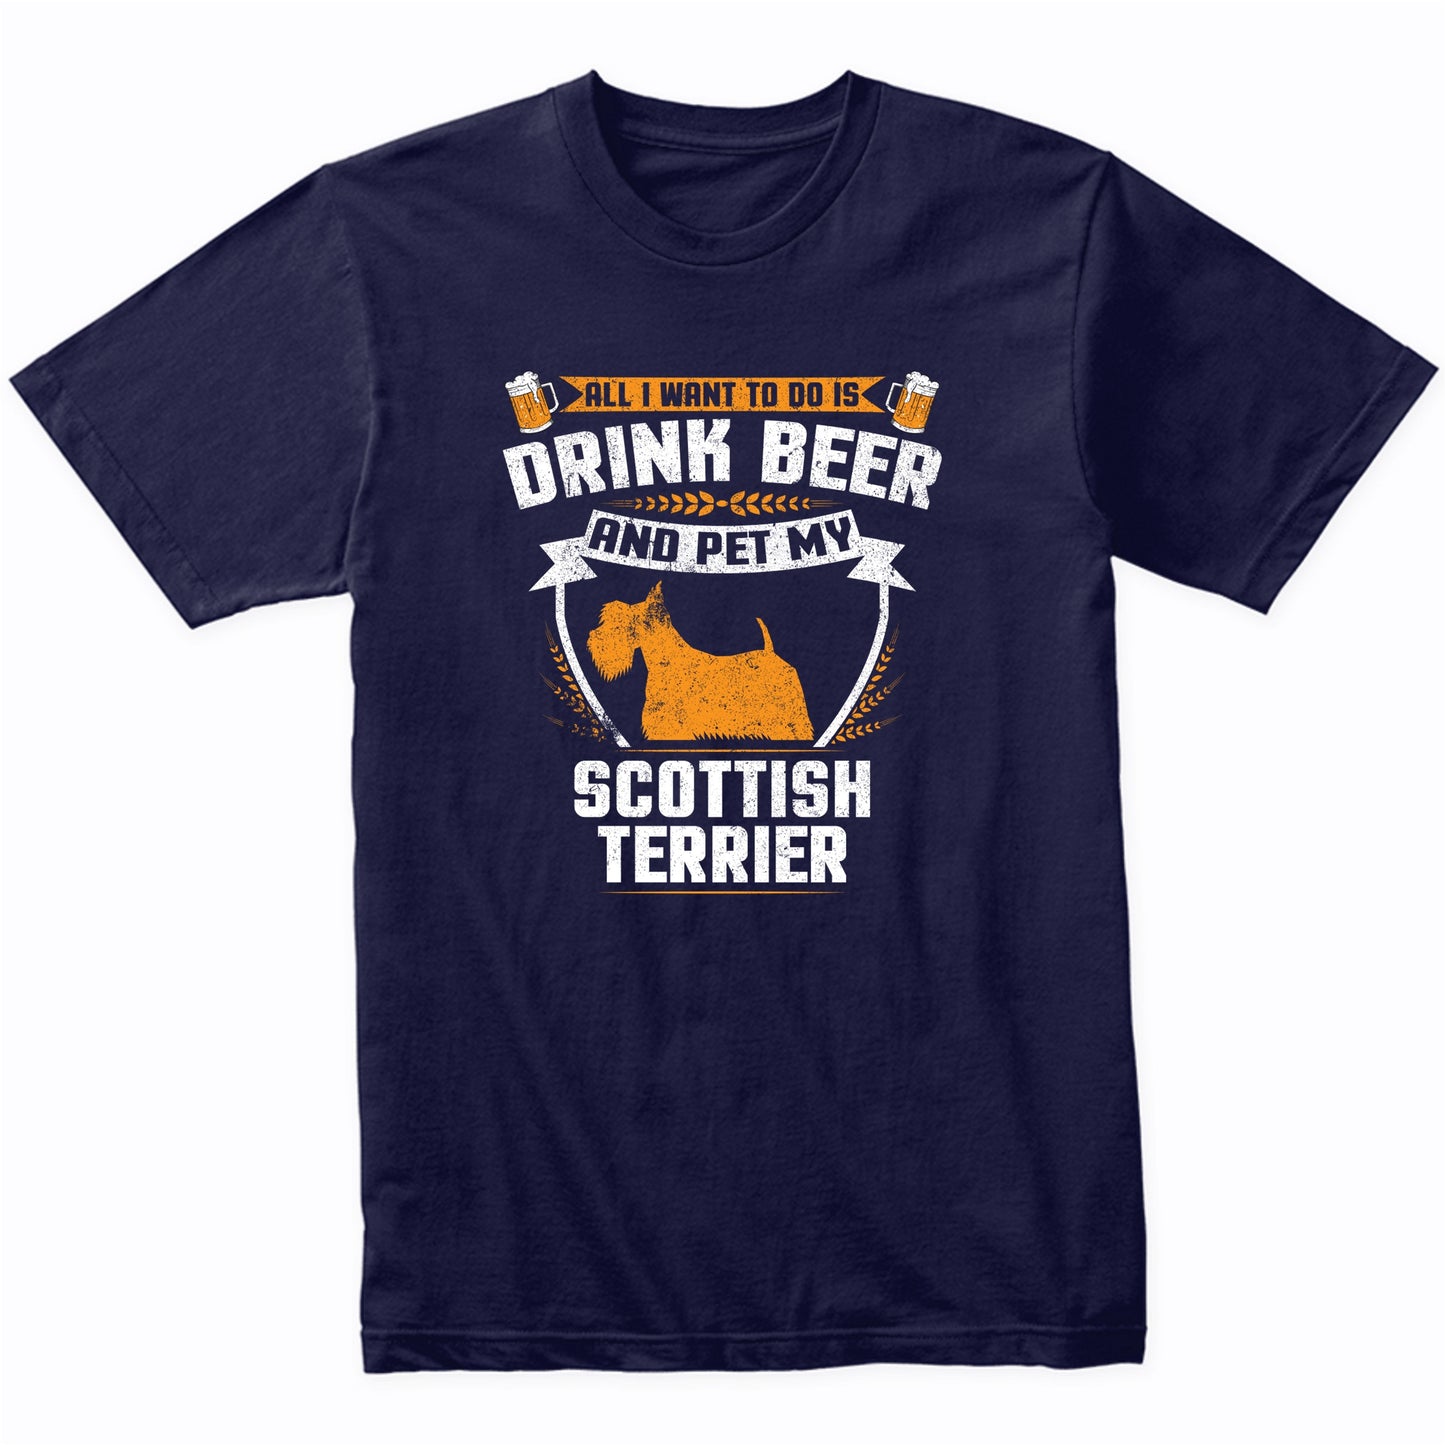 All I Want To Do Is Drink Beer And Pet My Scottish Terrier Funny Dog Owner Shirt